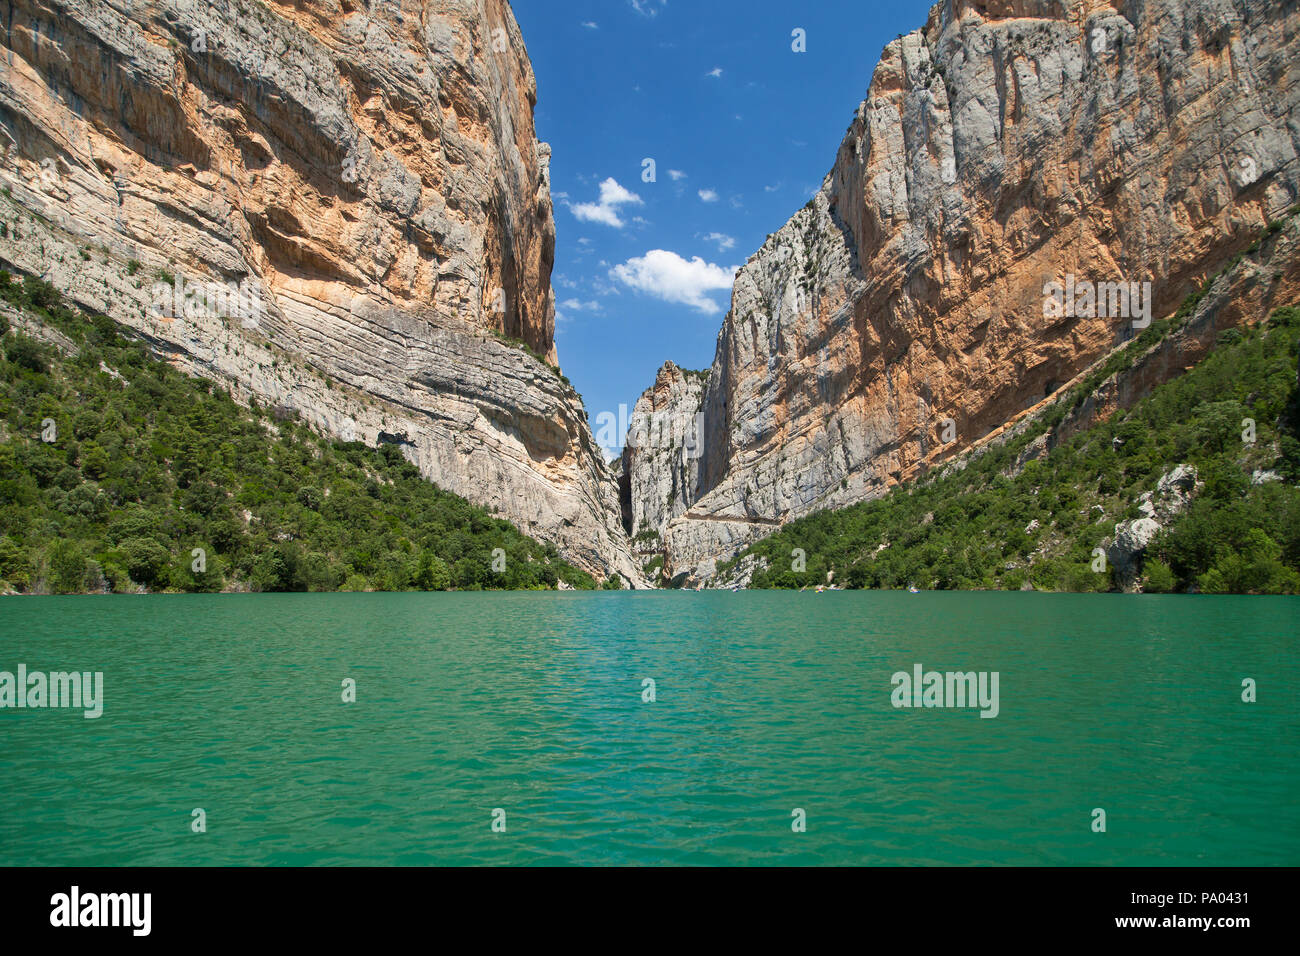 The Montsec and the Mont-Rebei Gorge in the border between Catalonia and Aragon, Spain. Stock Photo